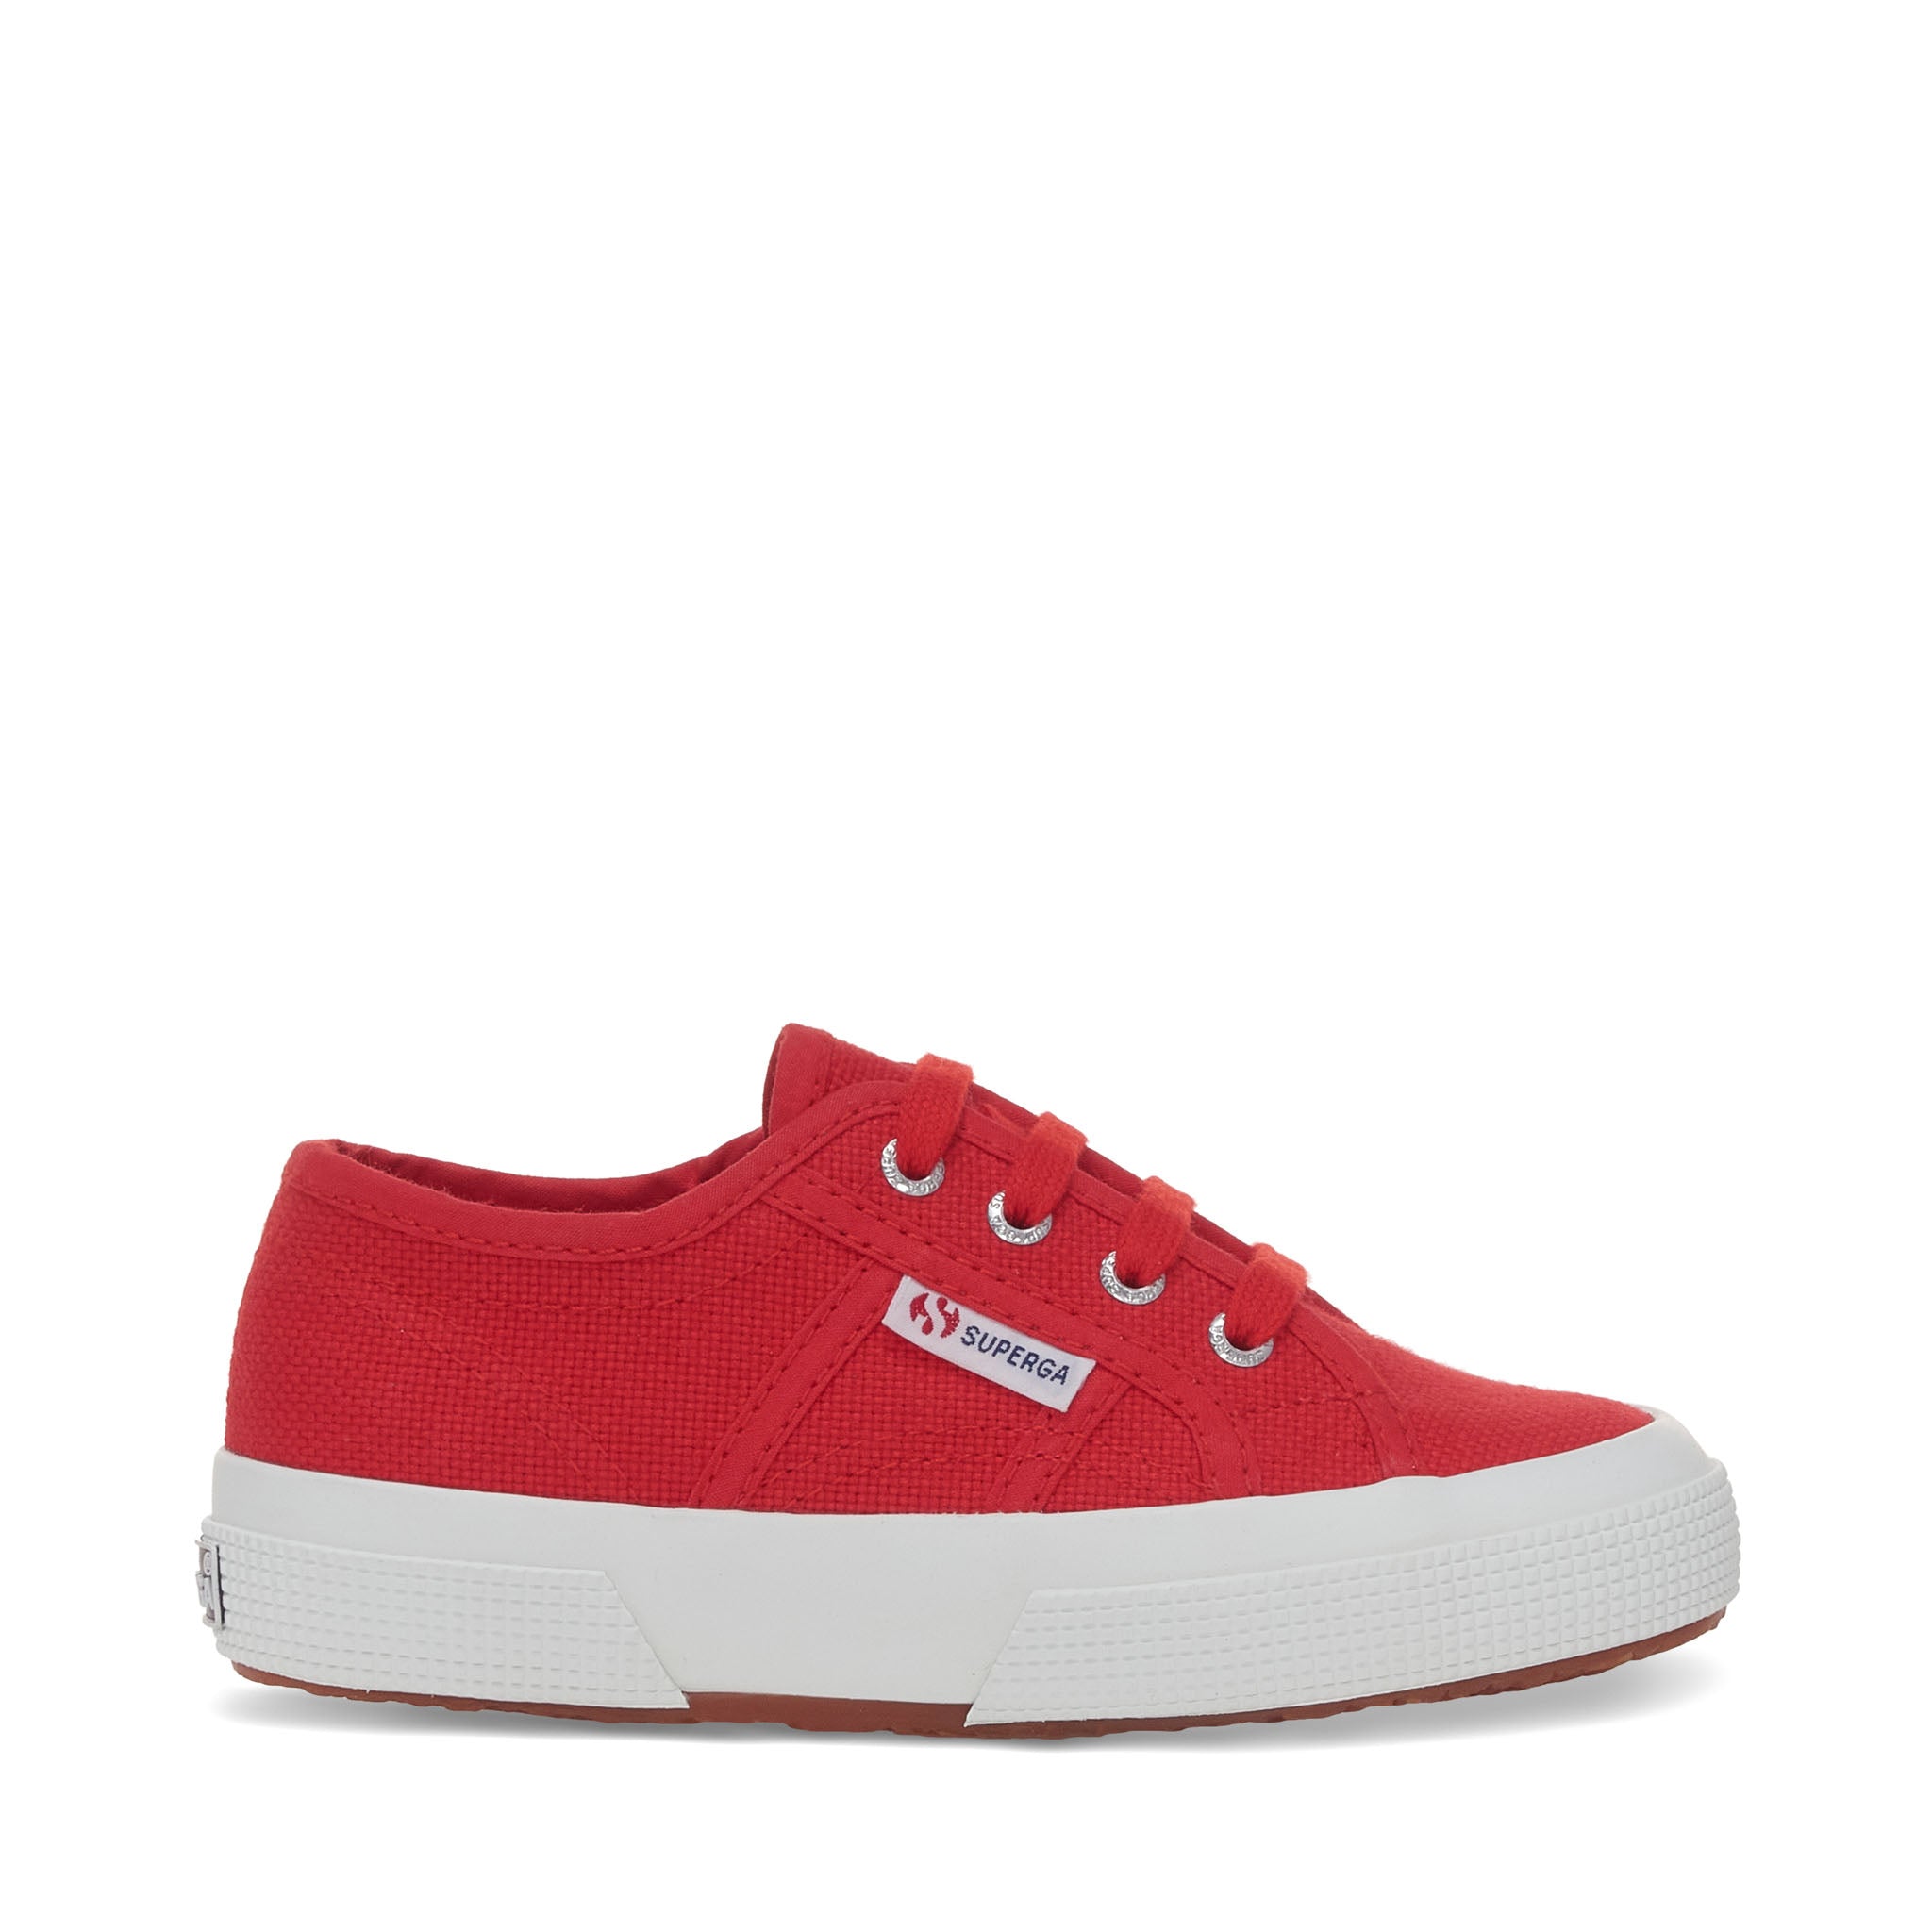 Superga 2750 Kids Jcot Classic Sneakers - Red White. Side view.